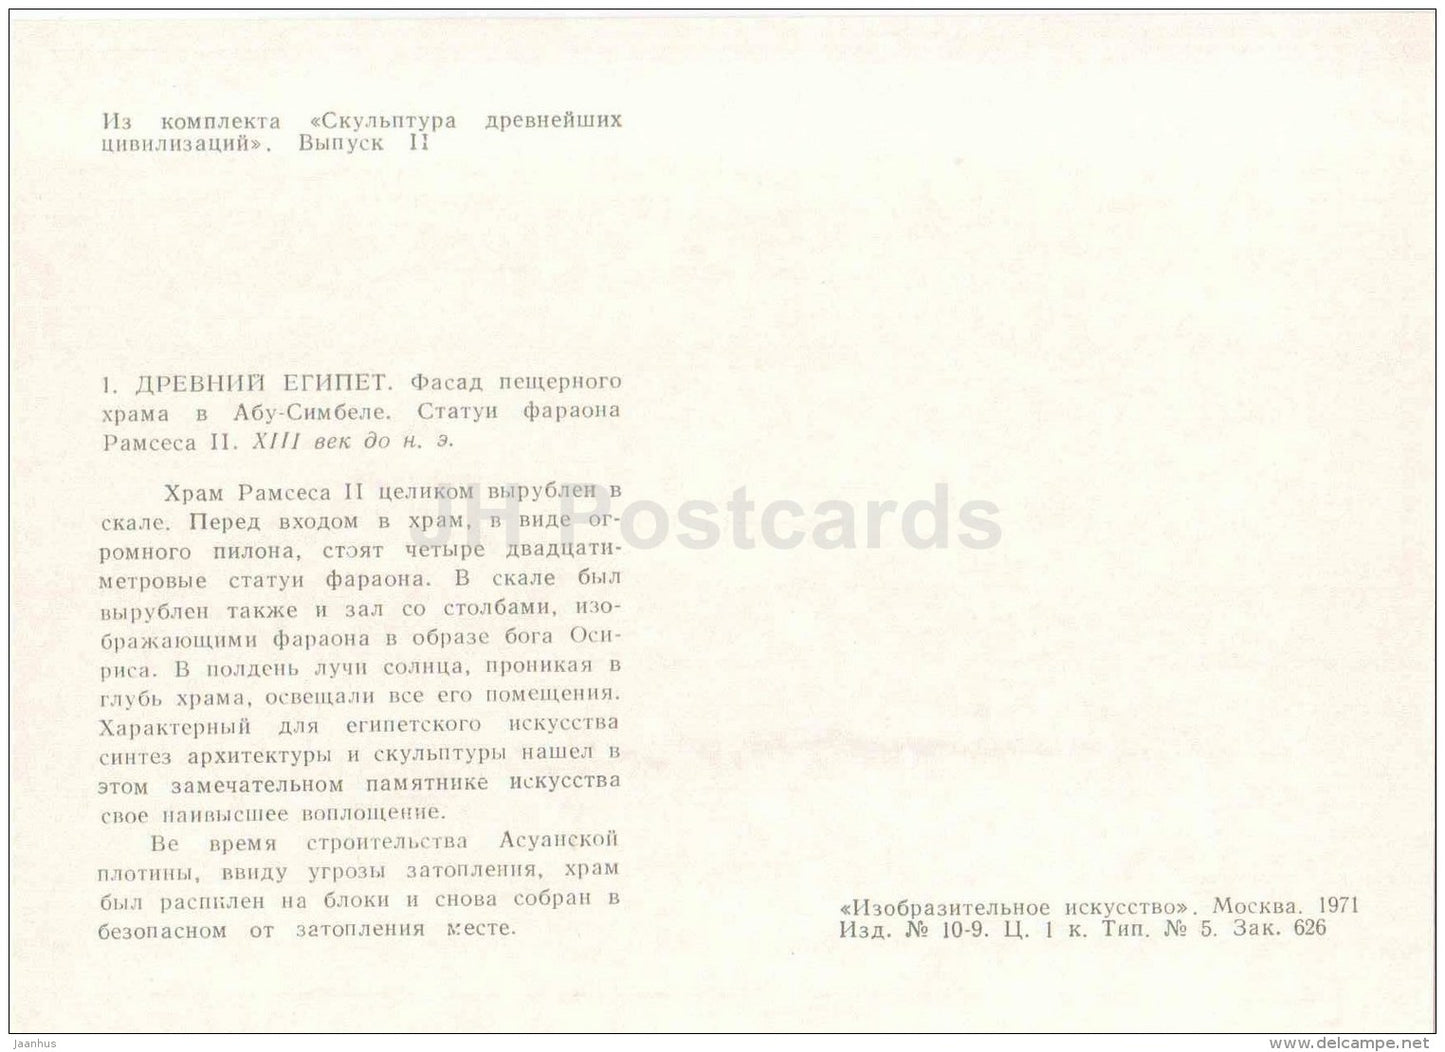 Abu Simbel cave temple facade - Ancient Egypt - Sculpture of the Ancient Civilizations - 1971 - Russia USSR - unused - JH Postcards